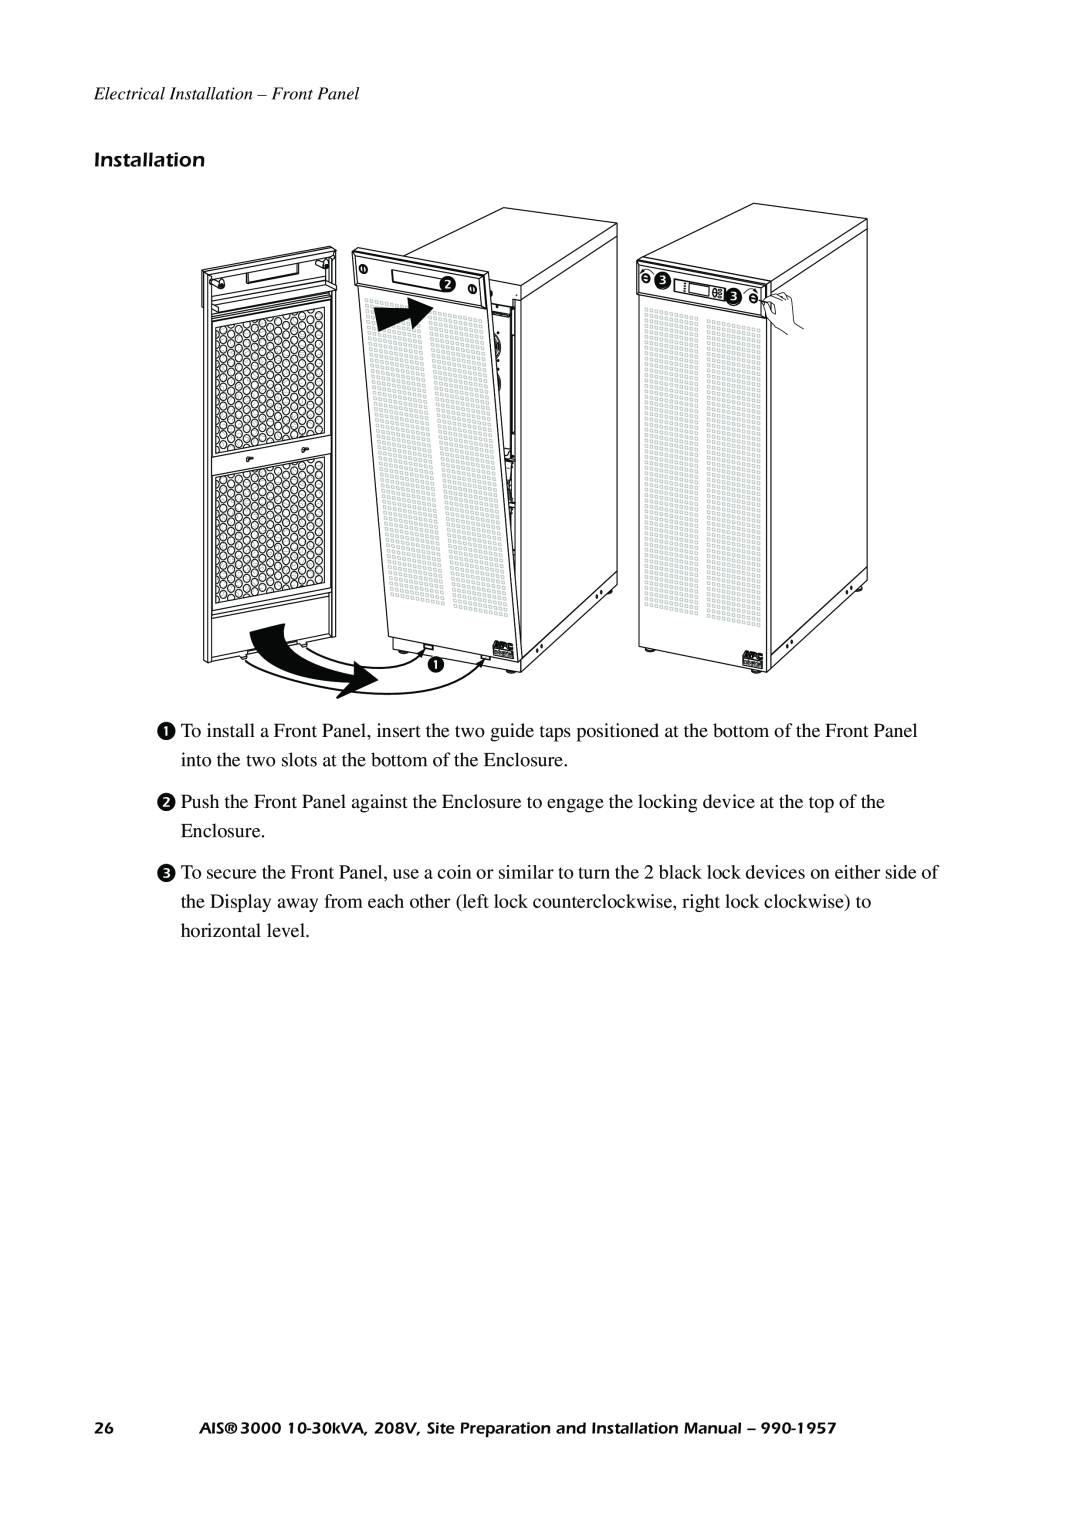 APC 3000 installation manual Electrical Installation - Front Panel 